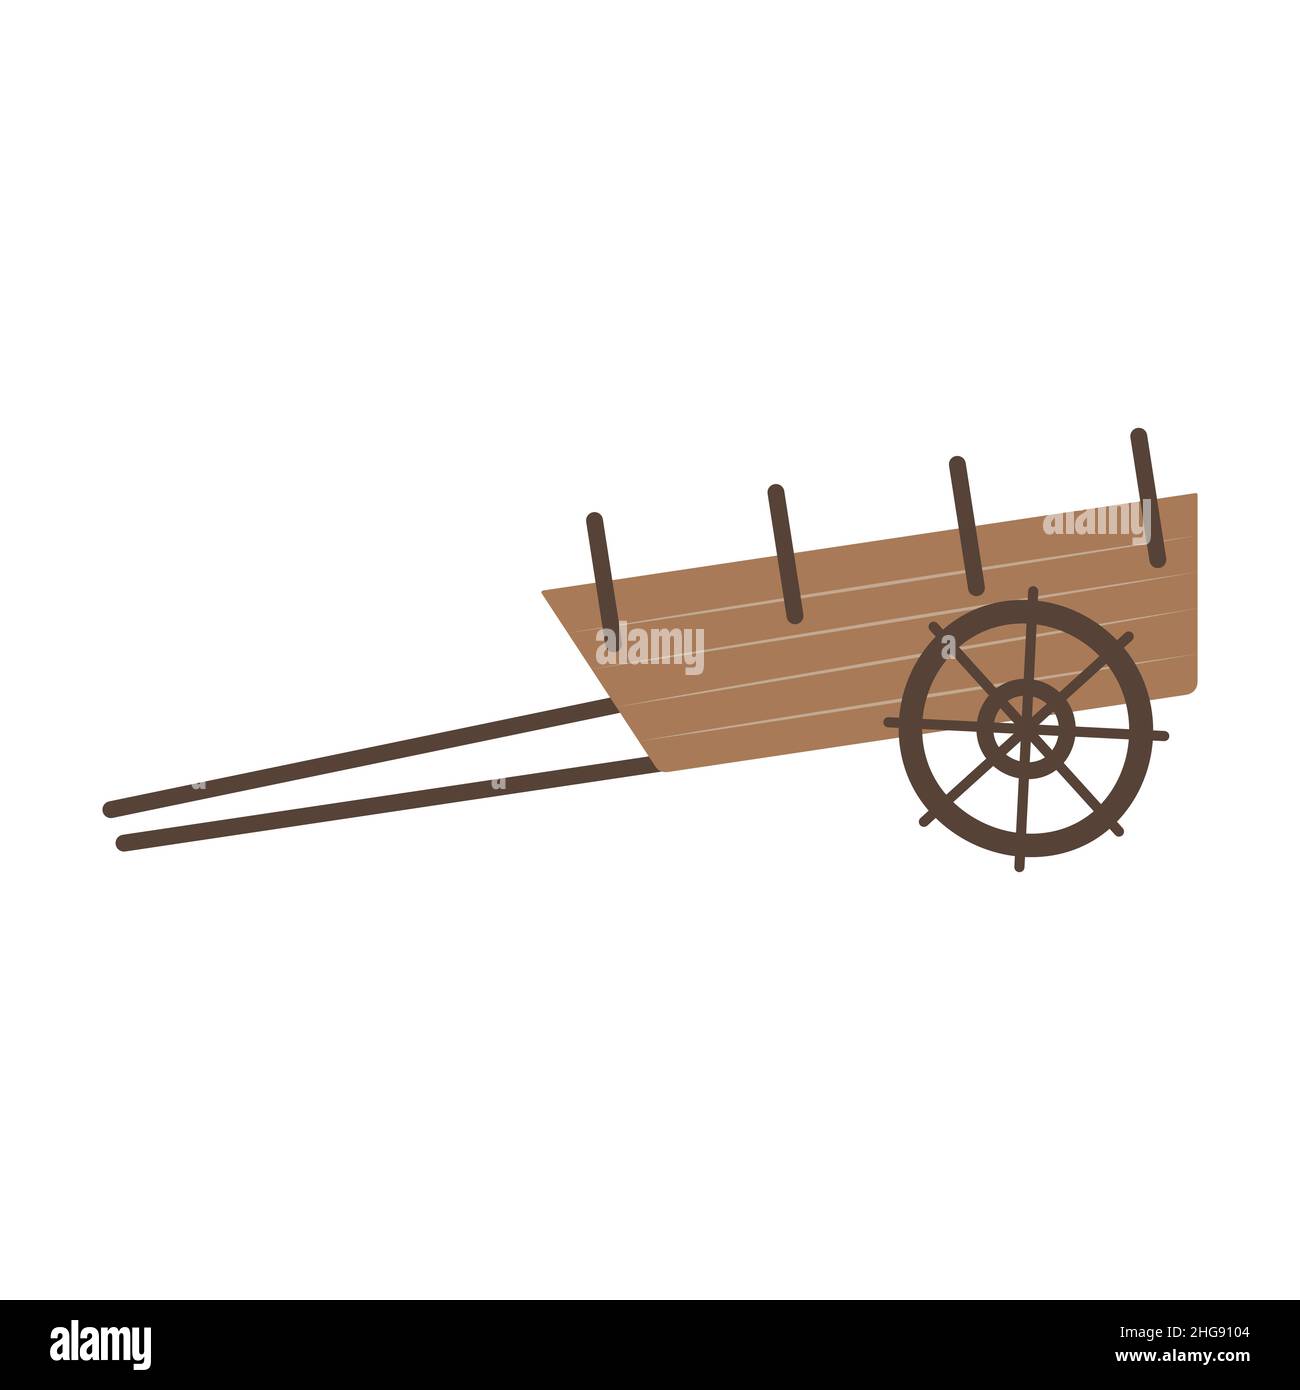 A simple two-wheeled cart for harnessing horses and cattle. Traditional rural transport. Farm and ranch item. Means for agriculture and farming. Stock Vector